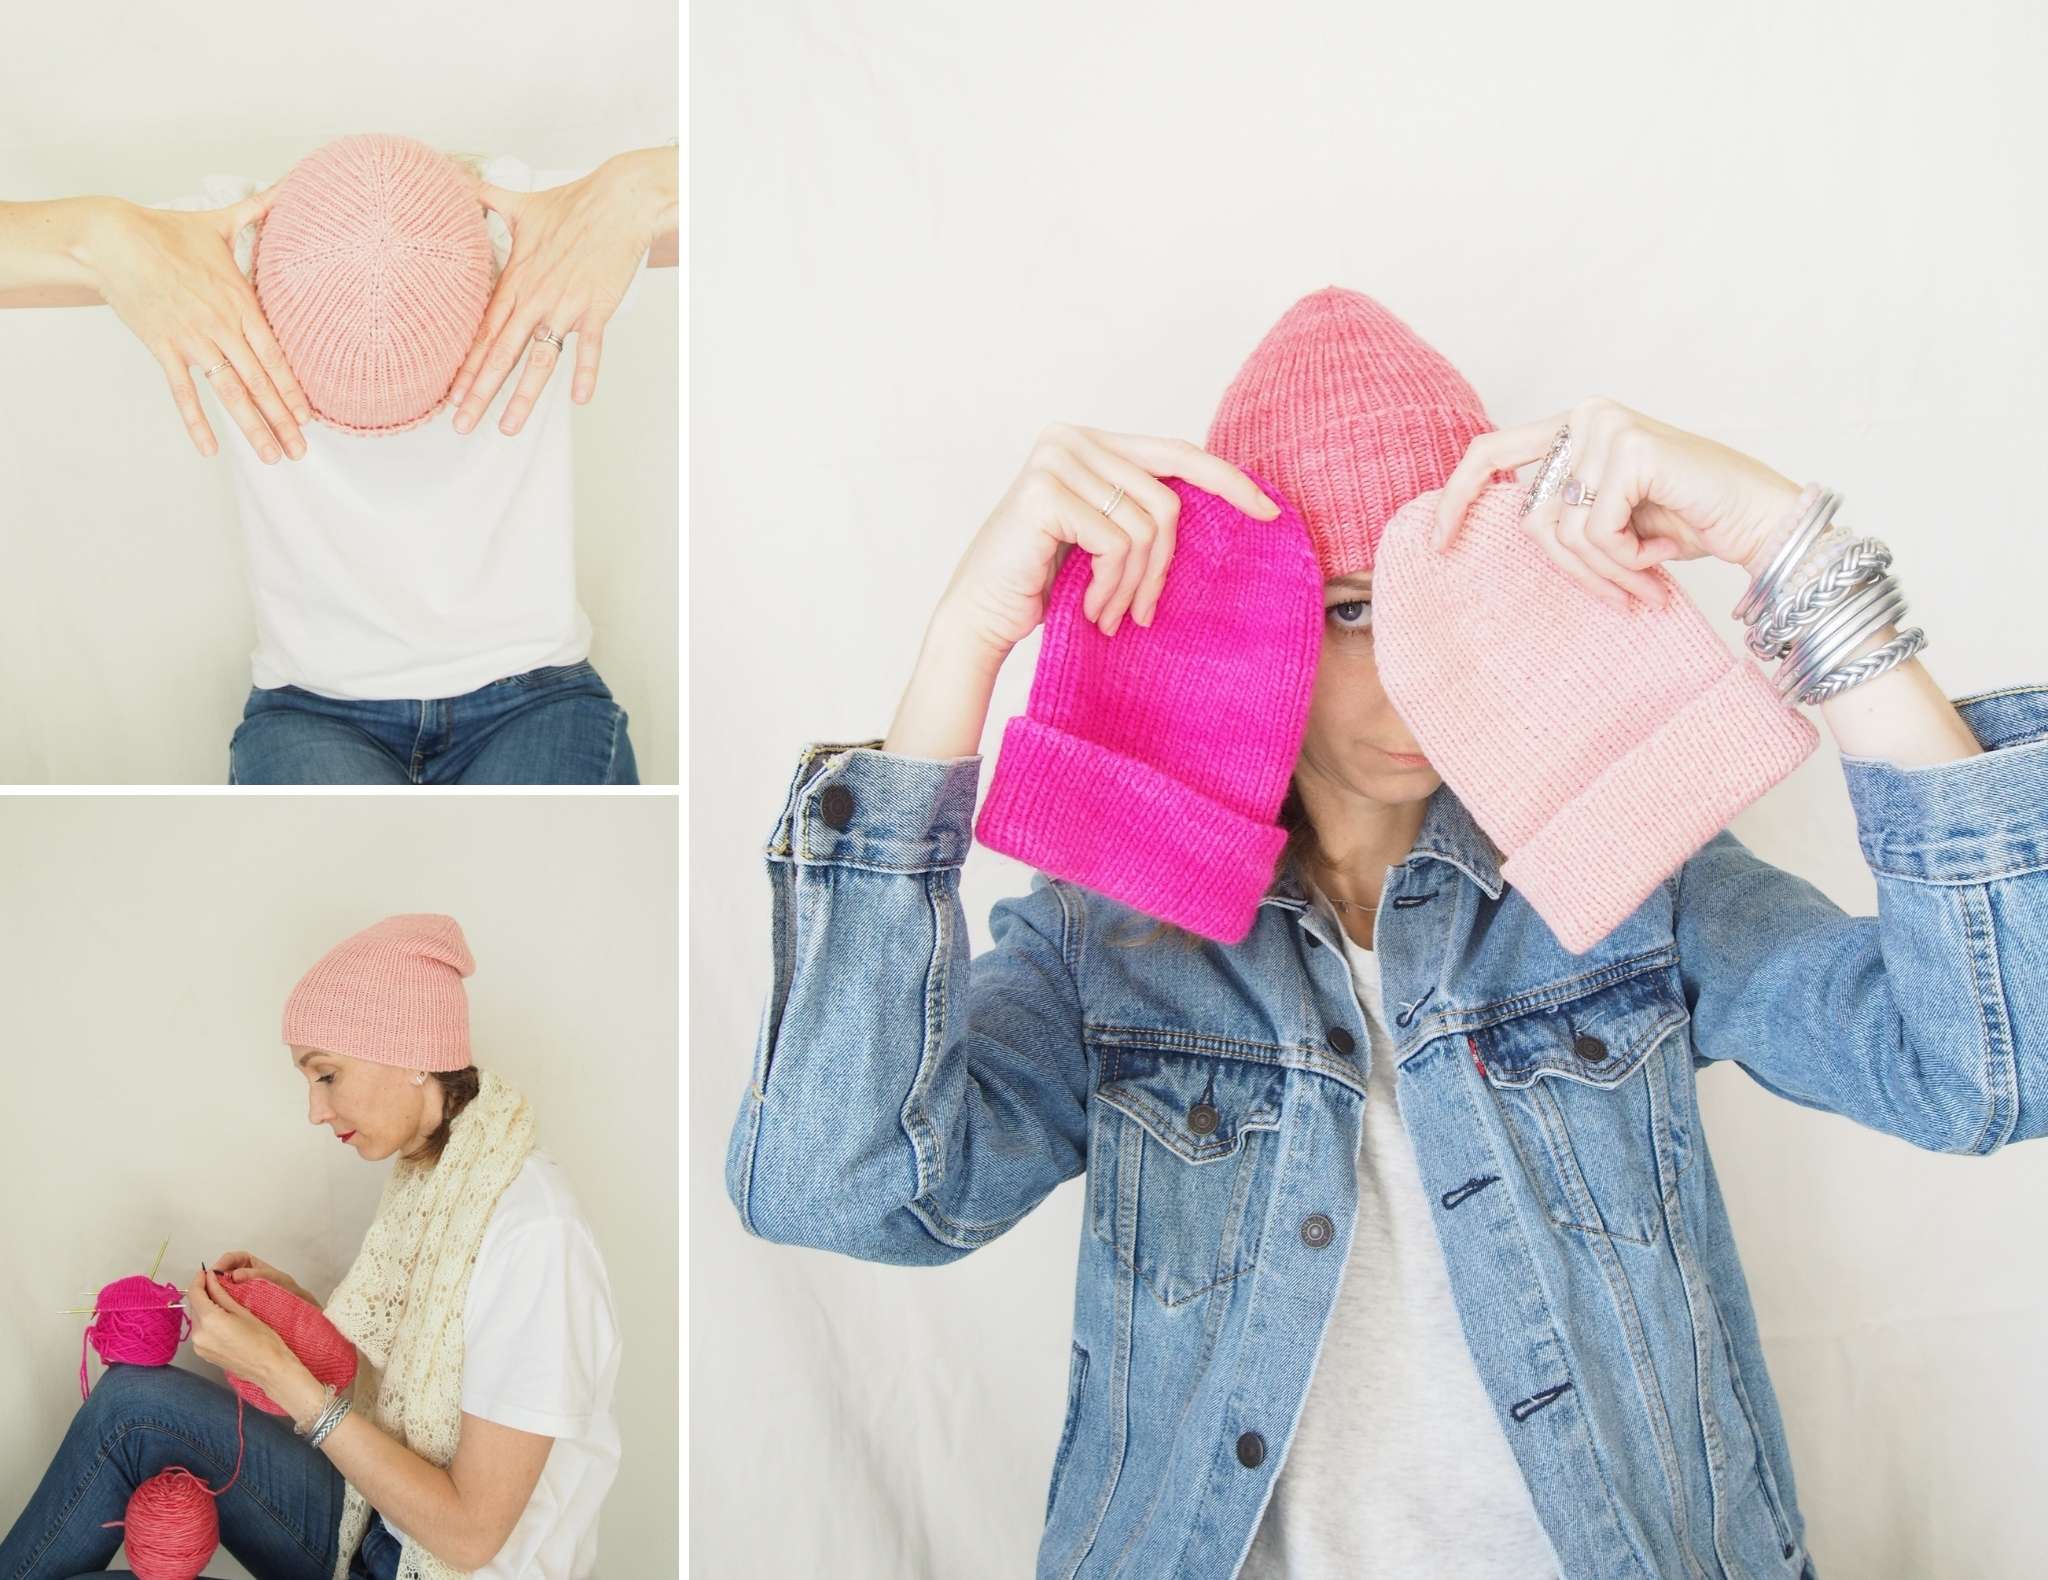 A collage of 3 images of the same person wearing and knitting the 3 pink hats pictured above.